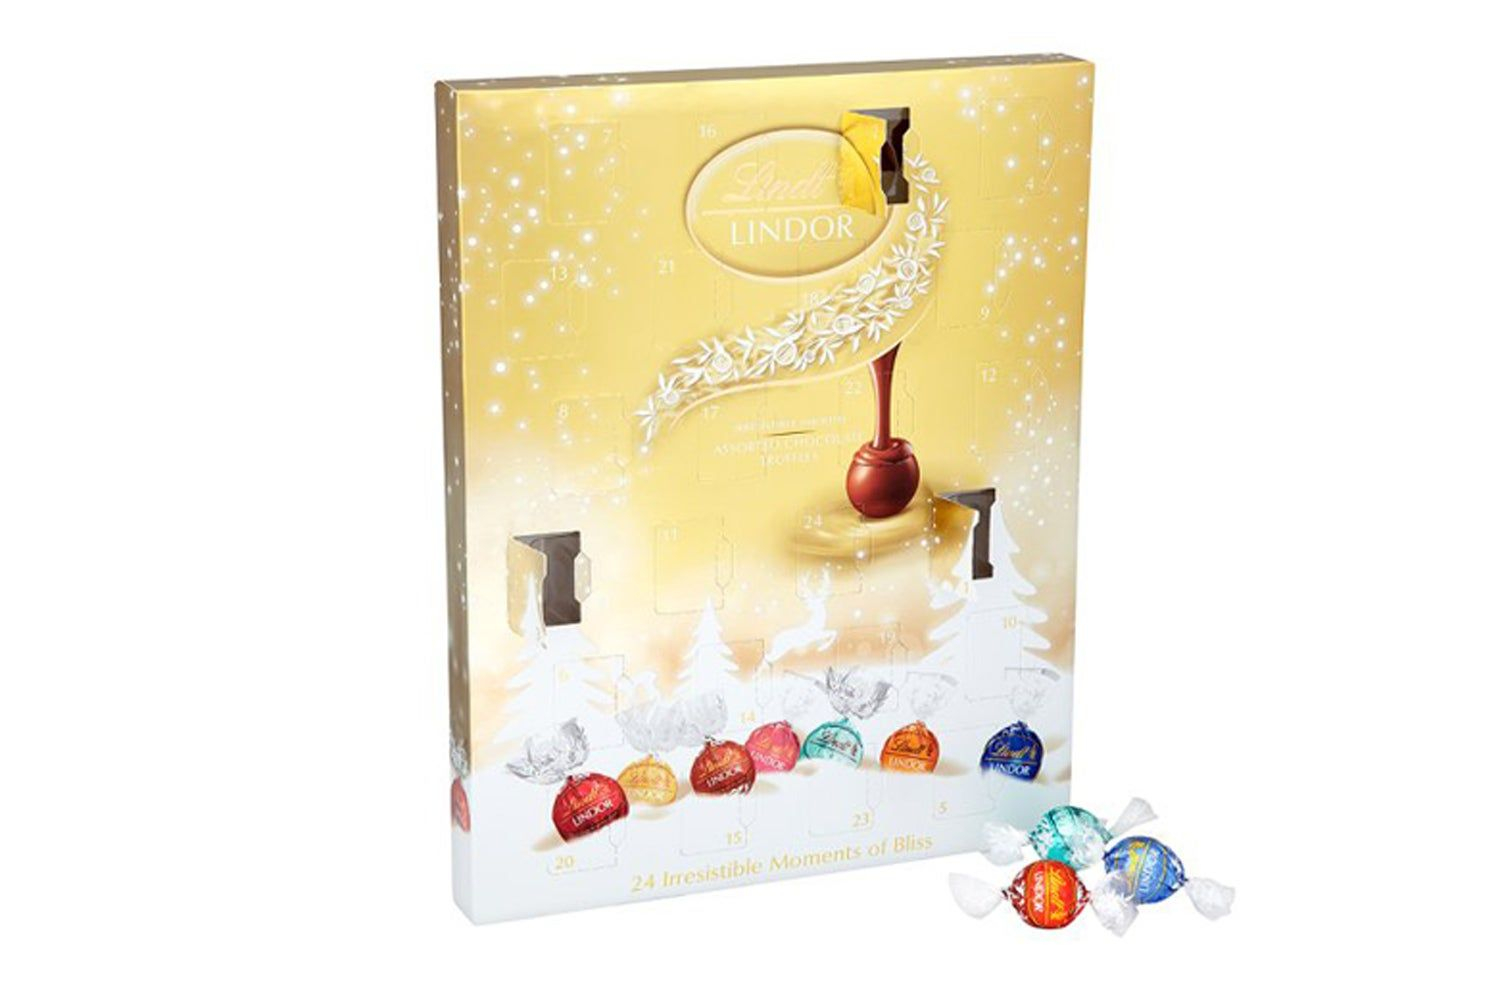 The Best Luxury Chocolate Advent Calendars For 2015 | Food